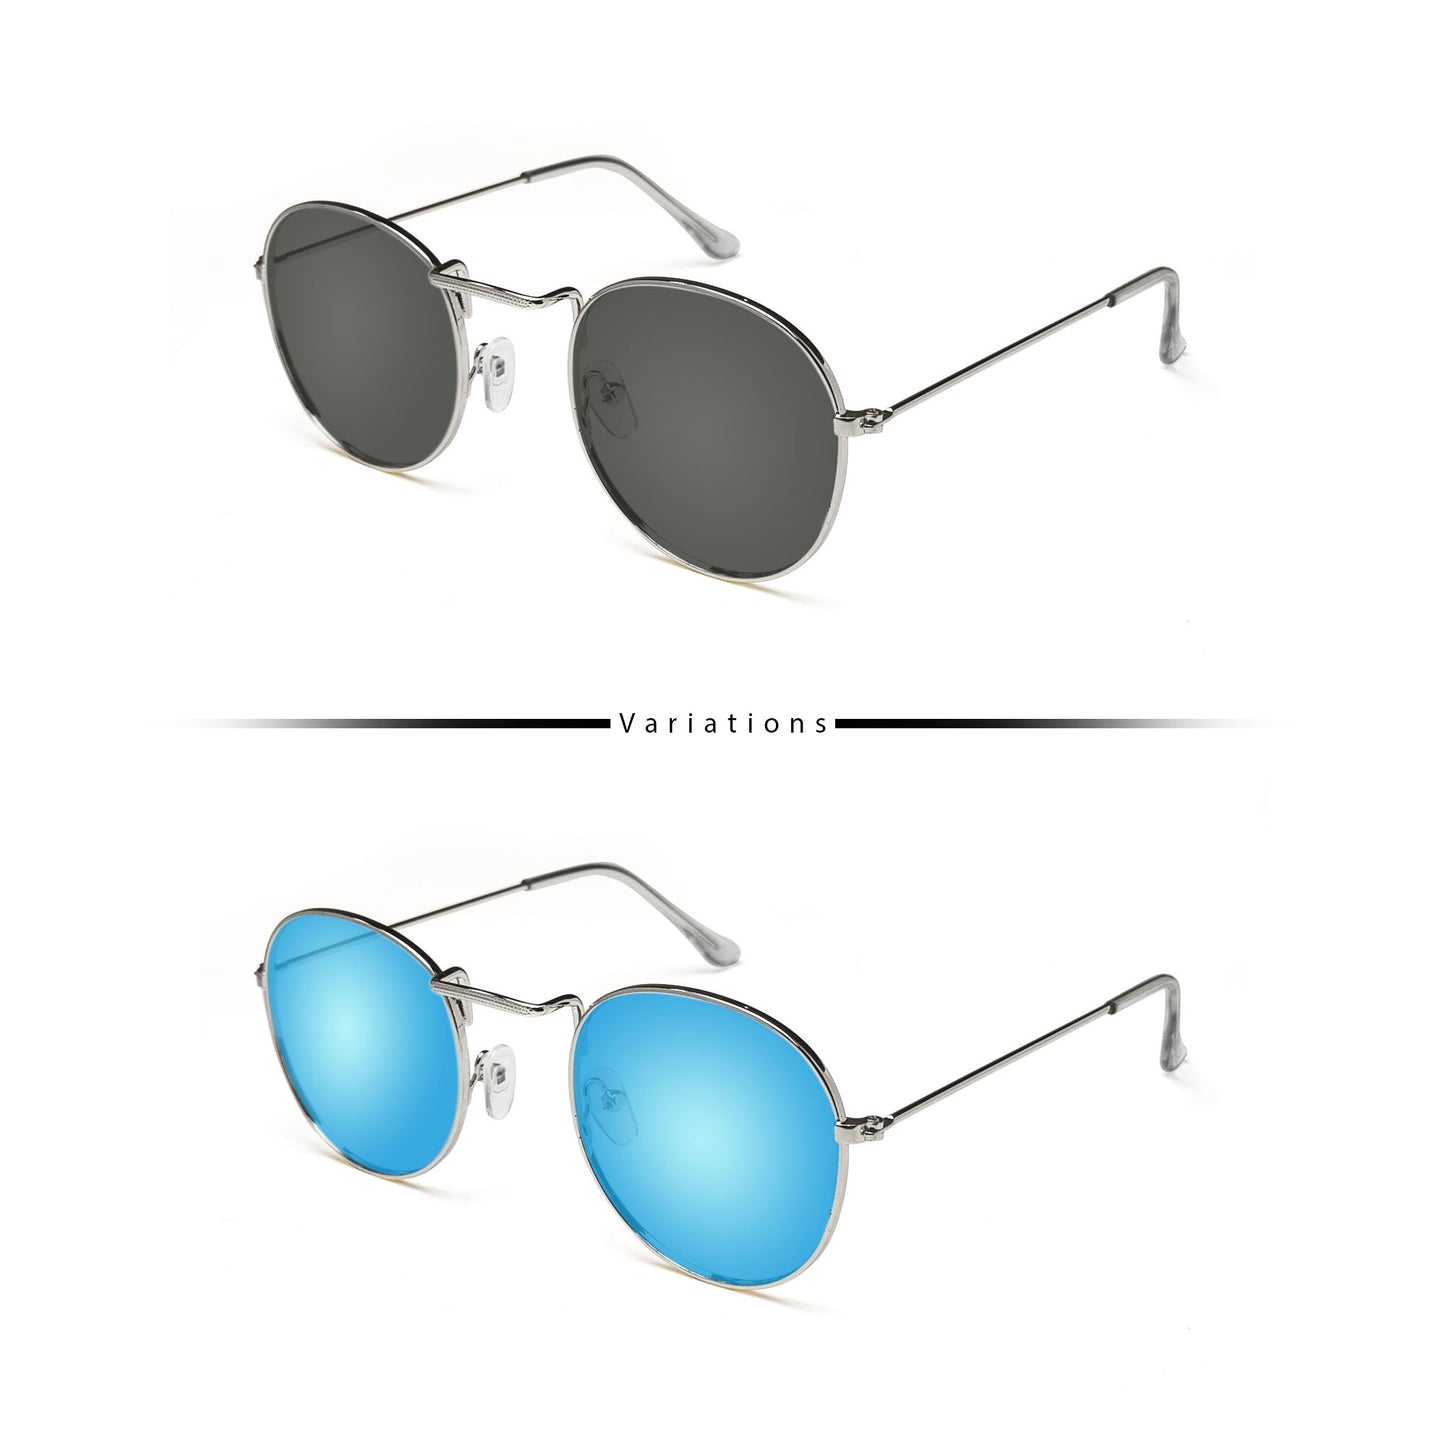 Peculiar Eyewear LOUISE Silver Round Metal Frame Sunglasses Shades For Men and Women